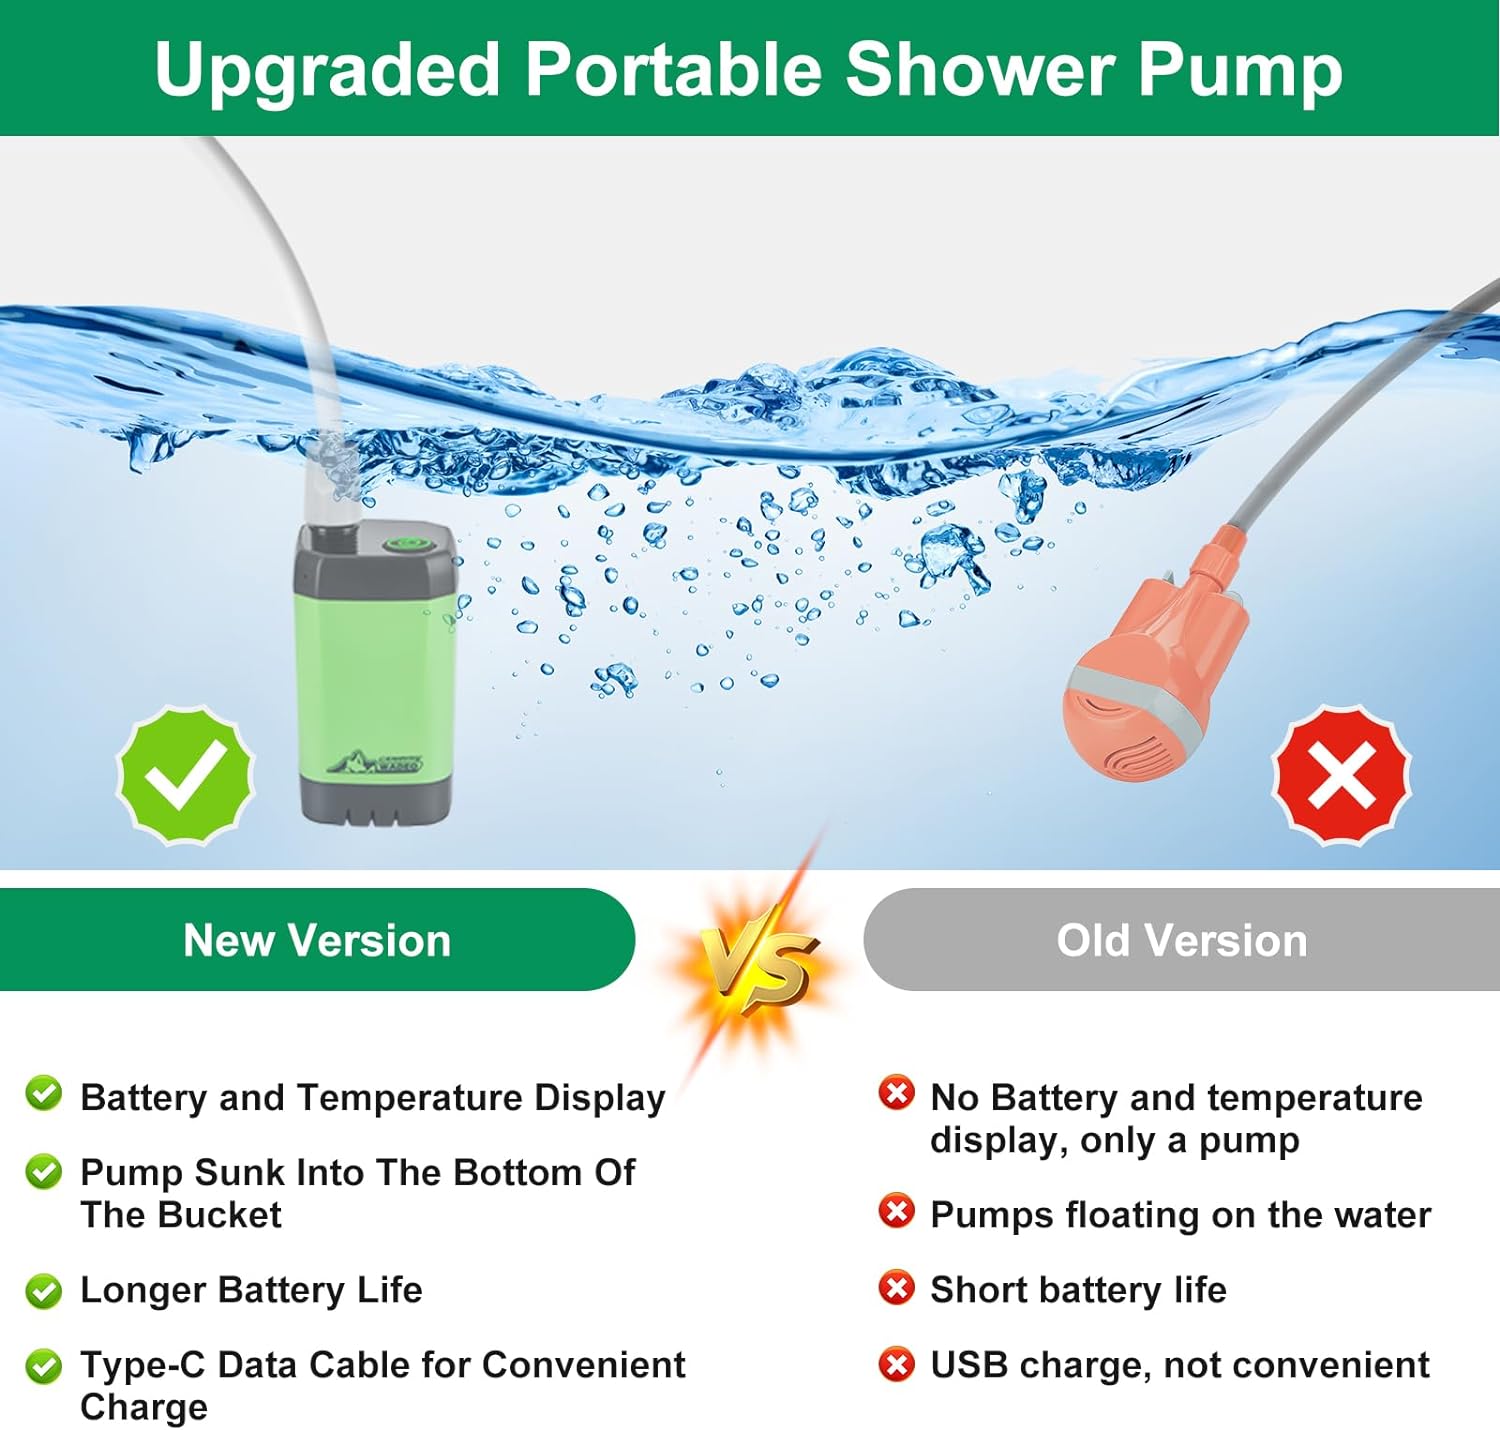 Portable Shower for Camping, Outdoor Electric Shower Rechargeable Pump with Intelligent Digital Display, Camping Shower Head Nozzle for Camping, Hiking, Traveling, Washing